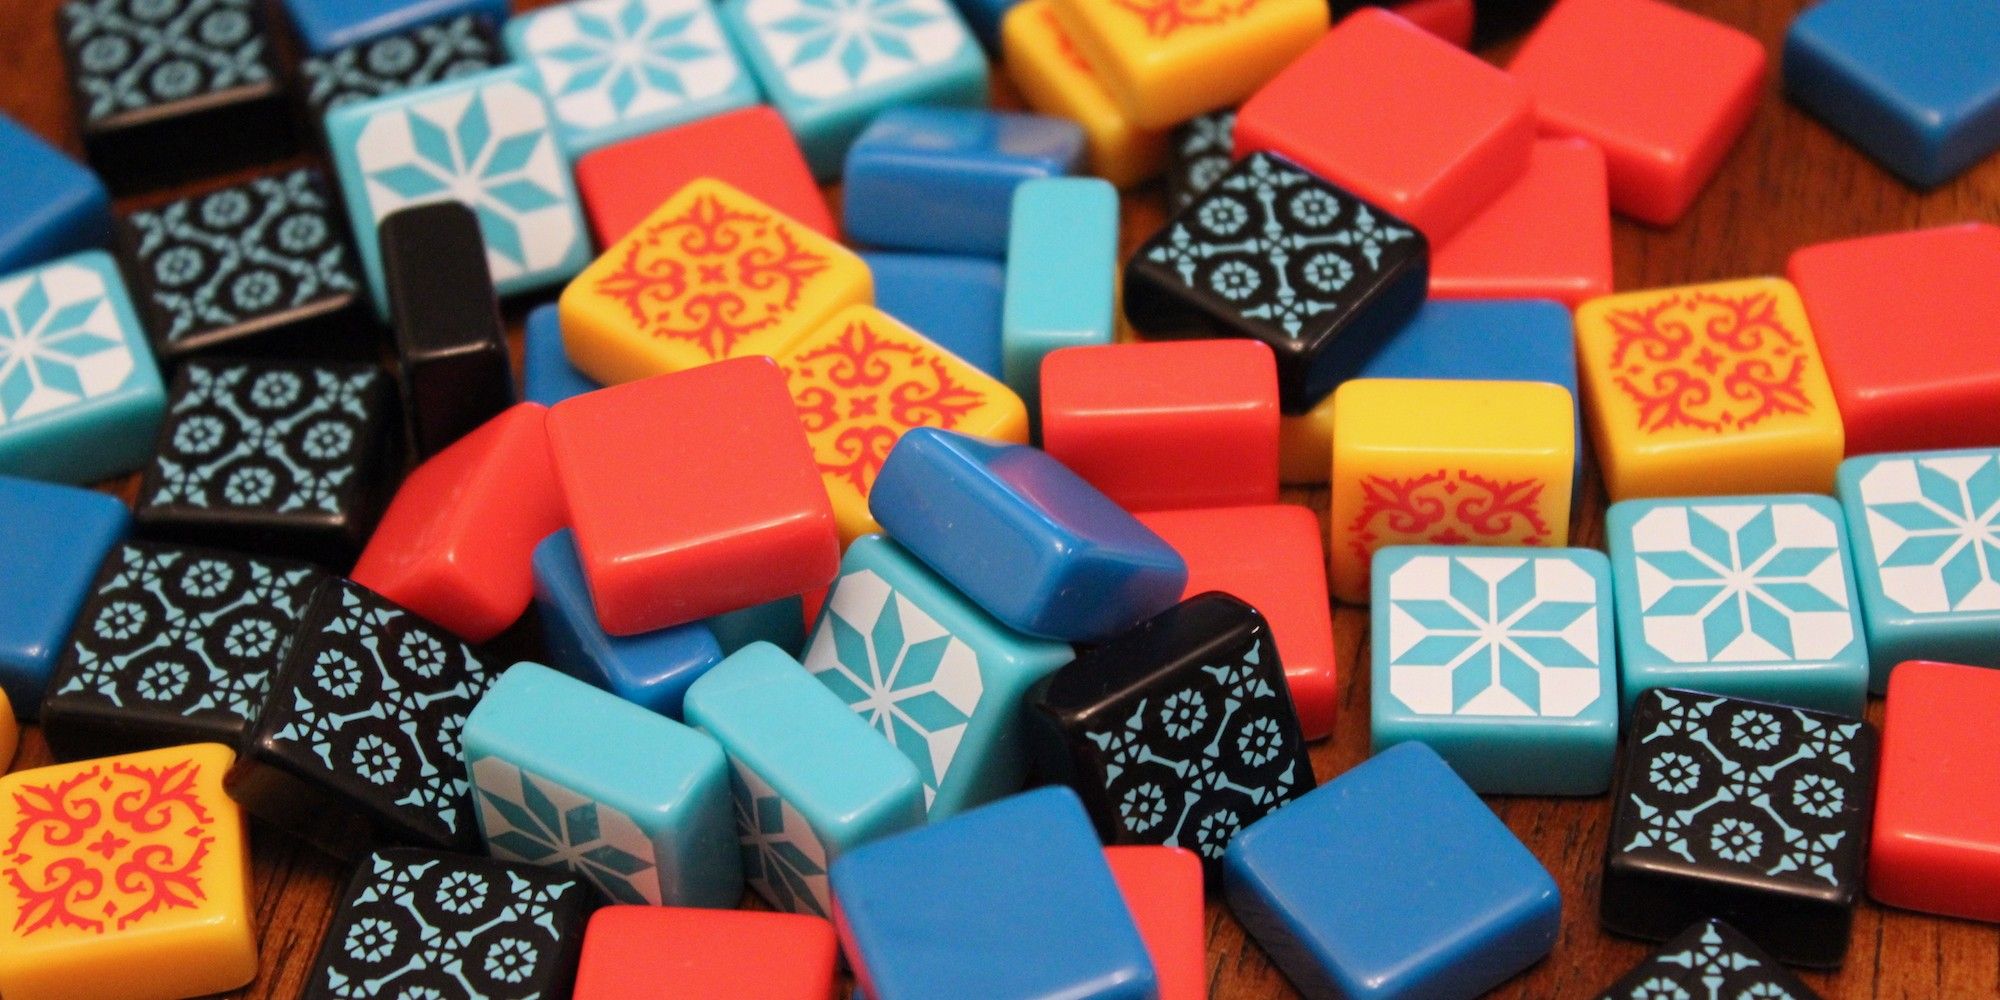 Various Colored Tiles Of Azul